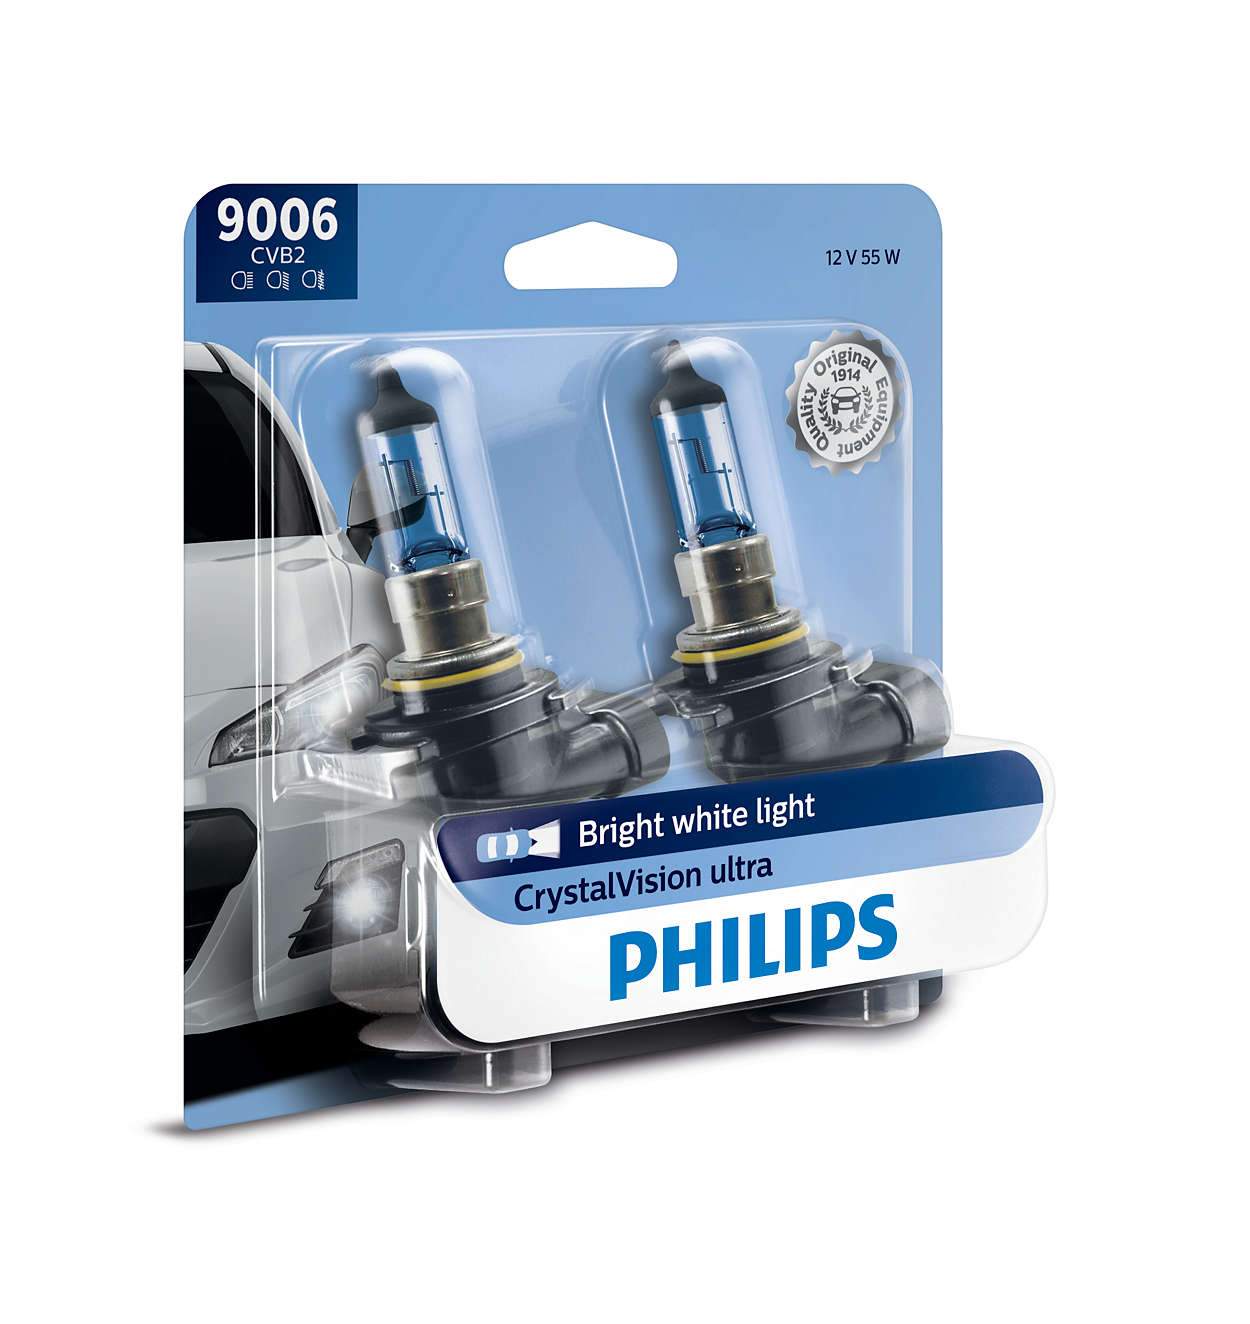 Philips Vision H7 desde 5,20 €